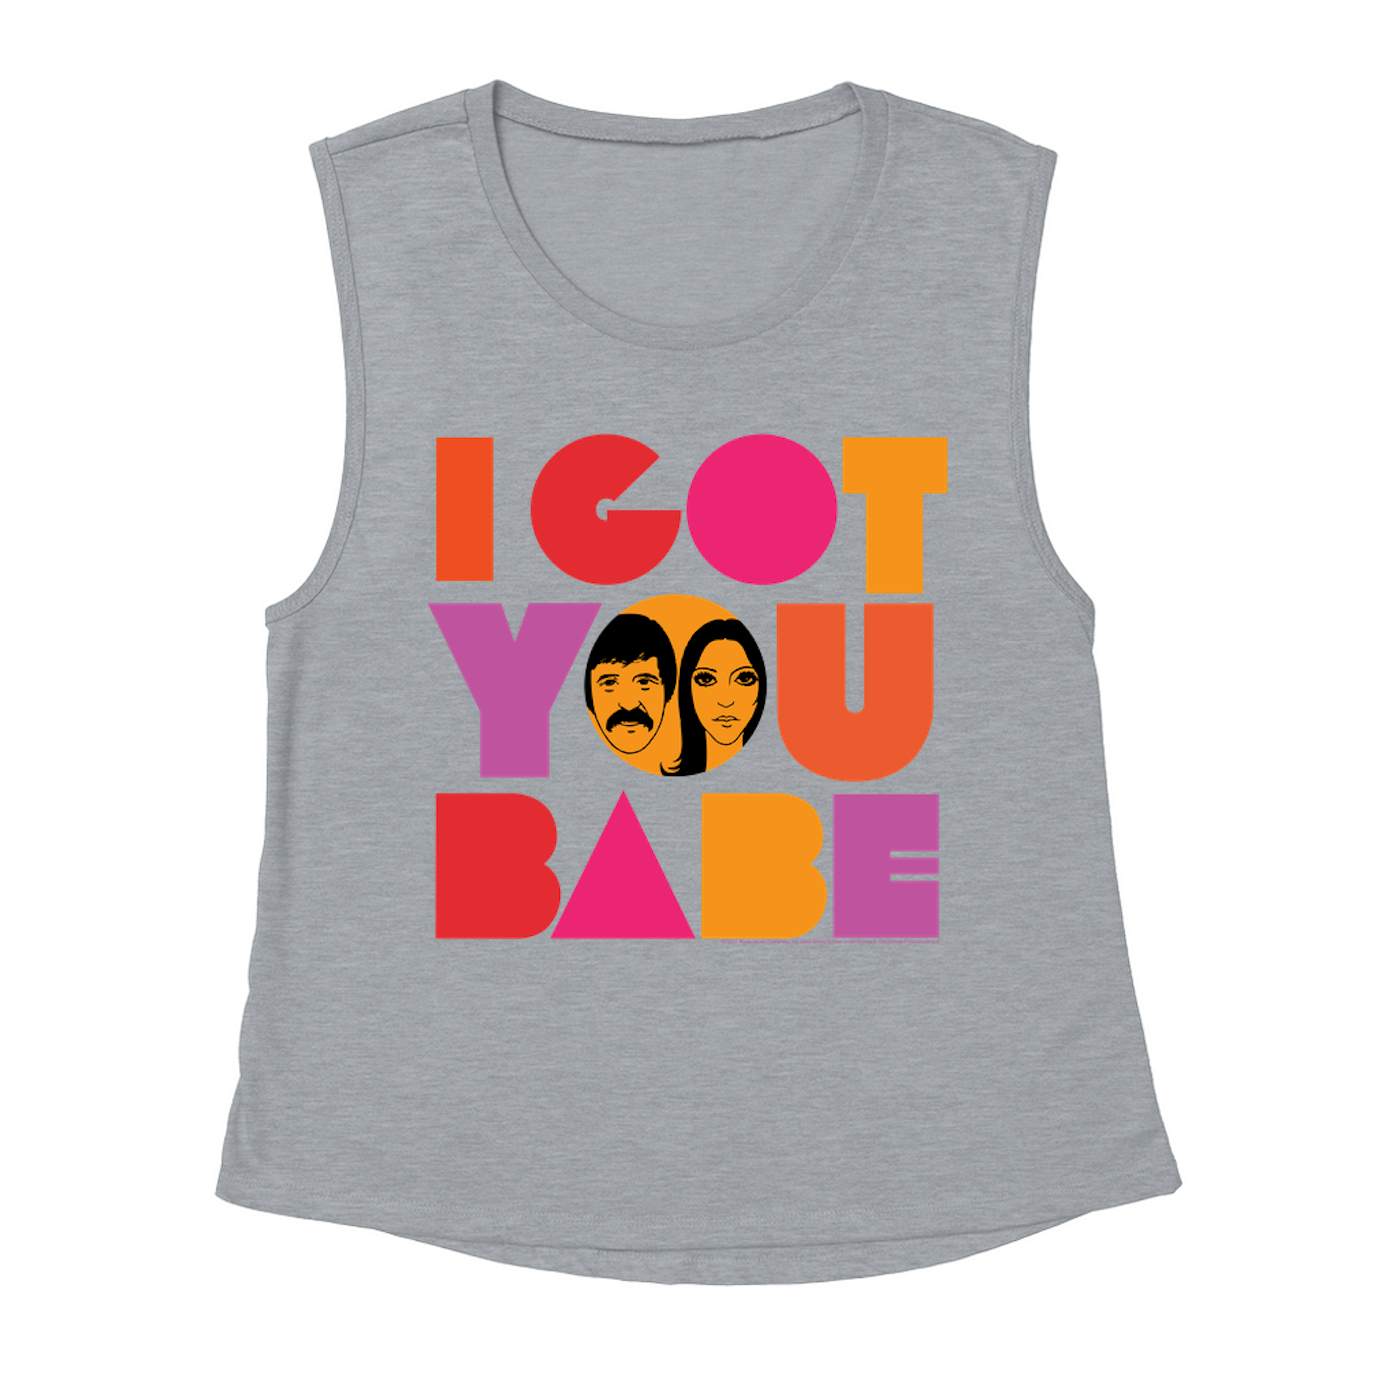 Sonny & Cher Ladies' Muscle Tank Top | I Got You Babe Bright Logo Image Sonny and Cher Shirt